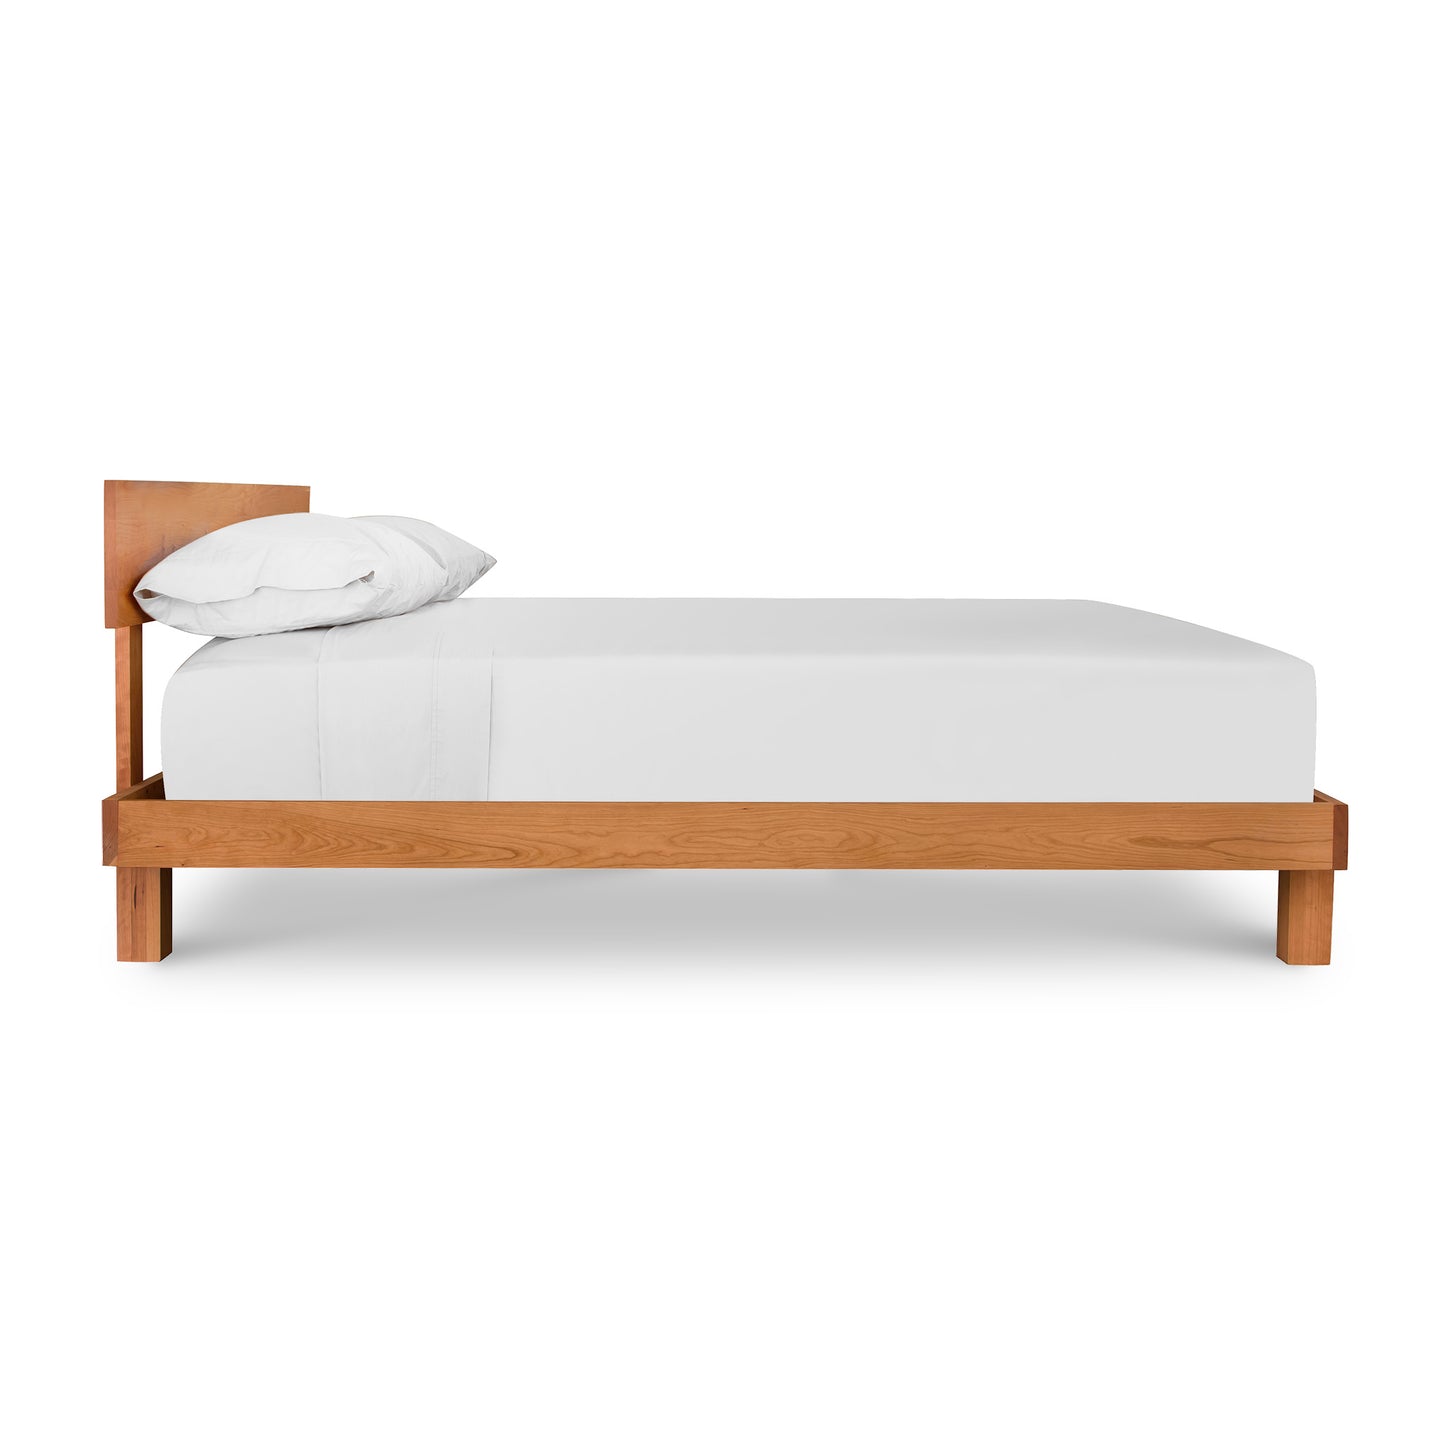 A single solid wood Vermont Furniture Designs Kipling Bed frame with a white mattress and a single white pillow, isolated on a white background.